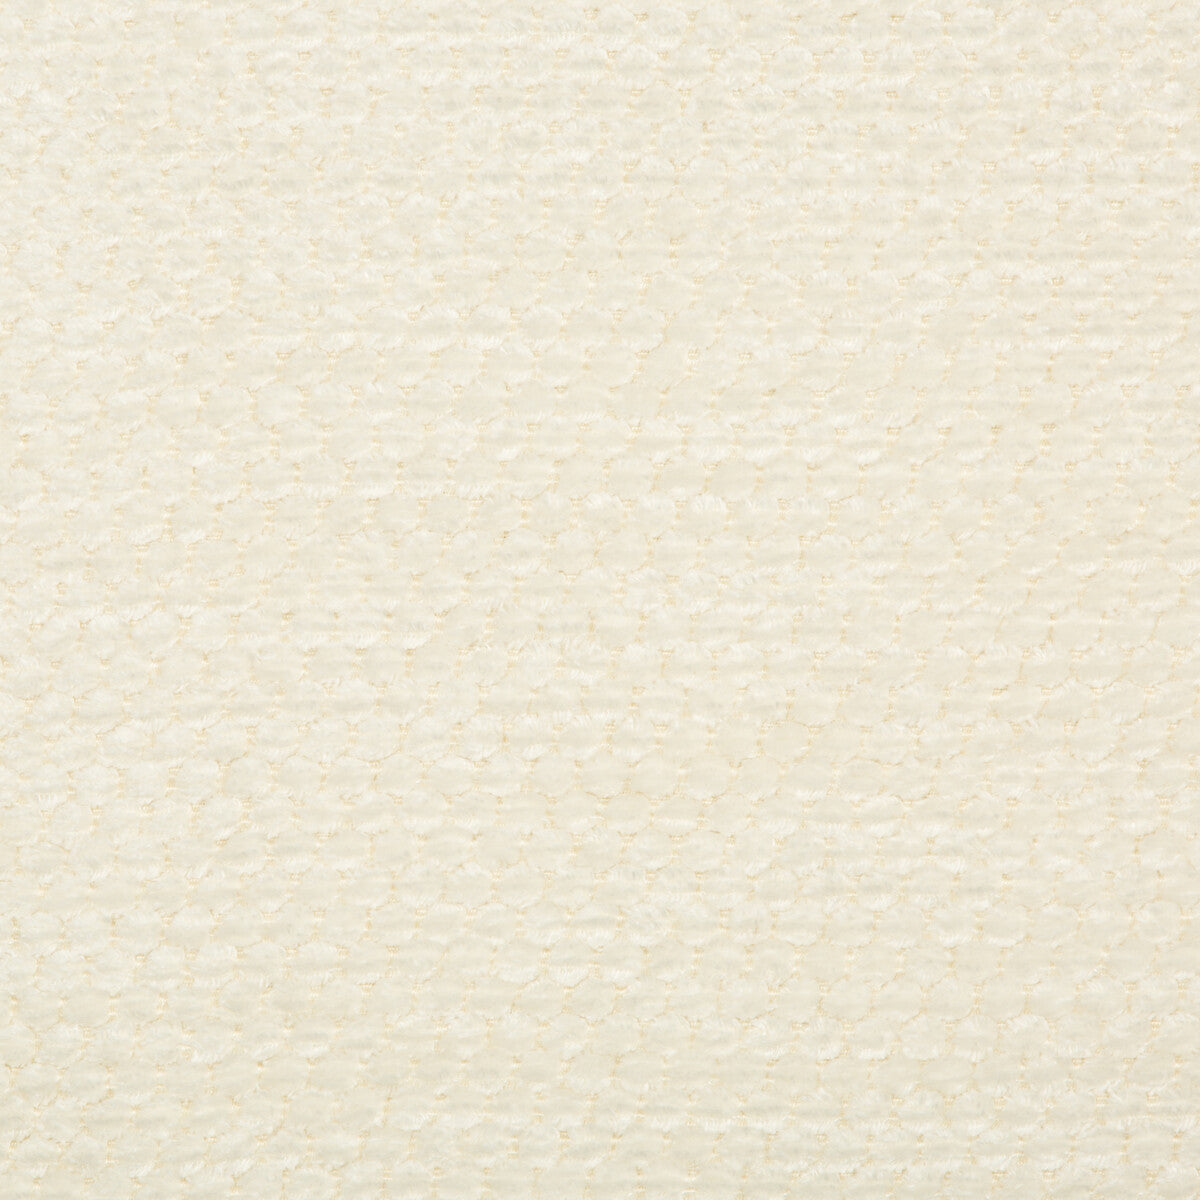 Lonsdale fabric in ivory color - pattern 2016125.101.0 - by Lee Jofa in the Furness Weaves collection